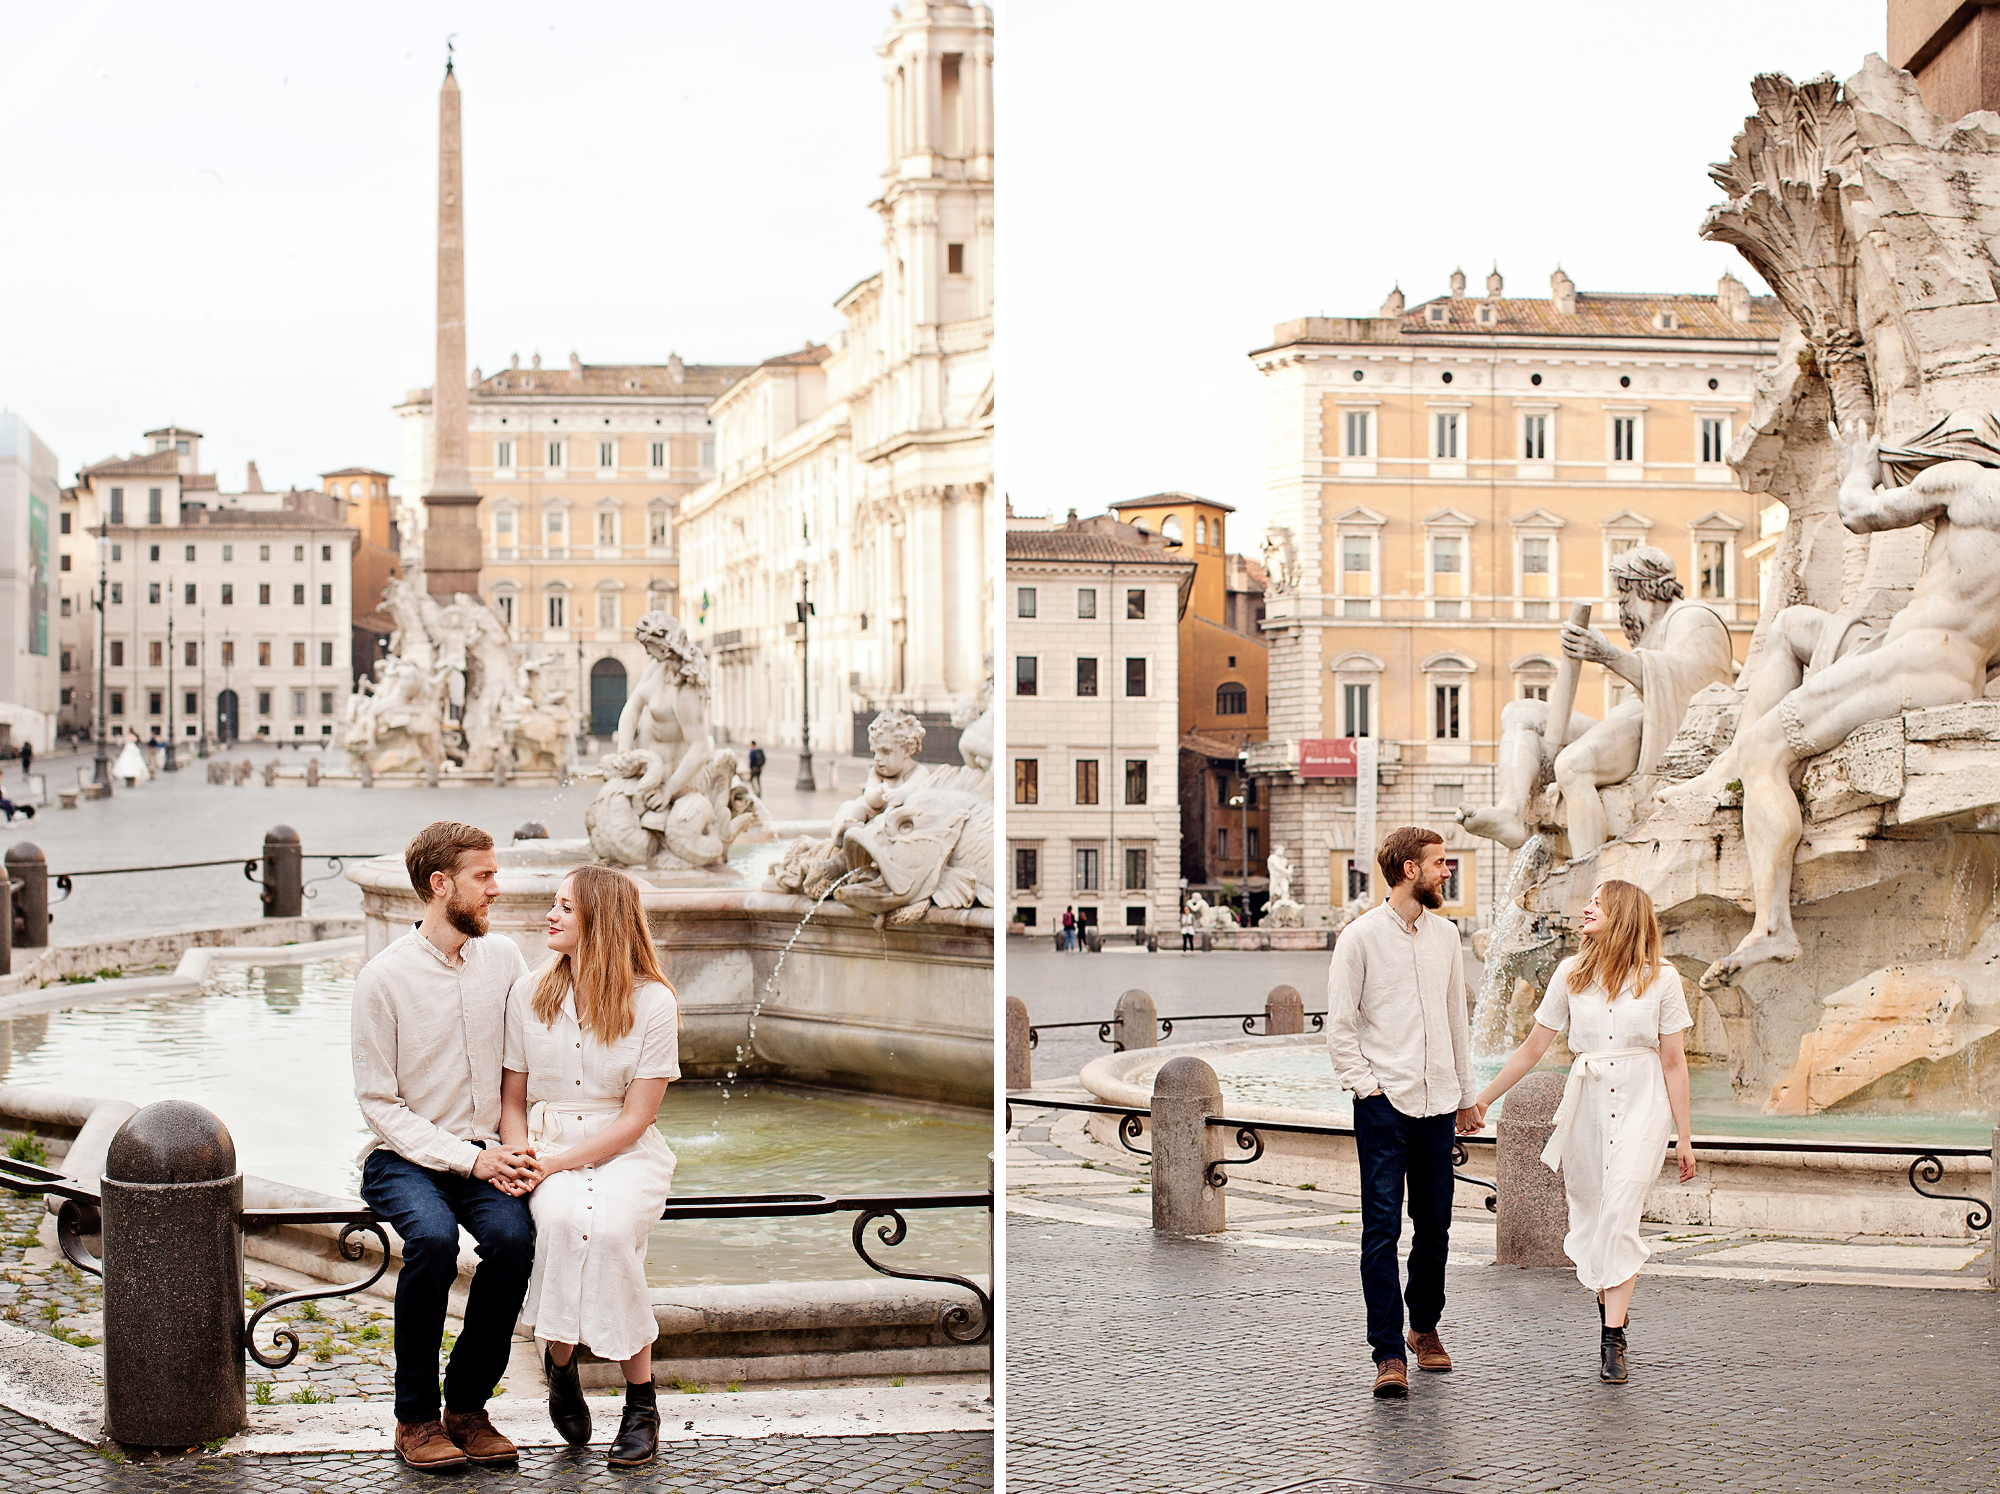 Honeymoon, vacation, family, engagement, maternity, wedding, love story individual and solo photoshoots in Rome, Italy by photographer Tricia Anne Photography | Rome Photographer, vacation, Pantheon, piazza Navona, Centro Storico Photo Shoot, photo shoot in rome, Rome Vacation Photographer, English speaking photographer in Rome